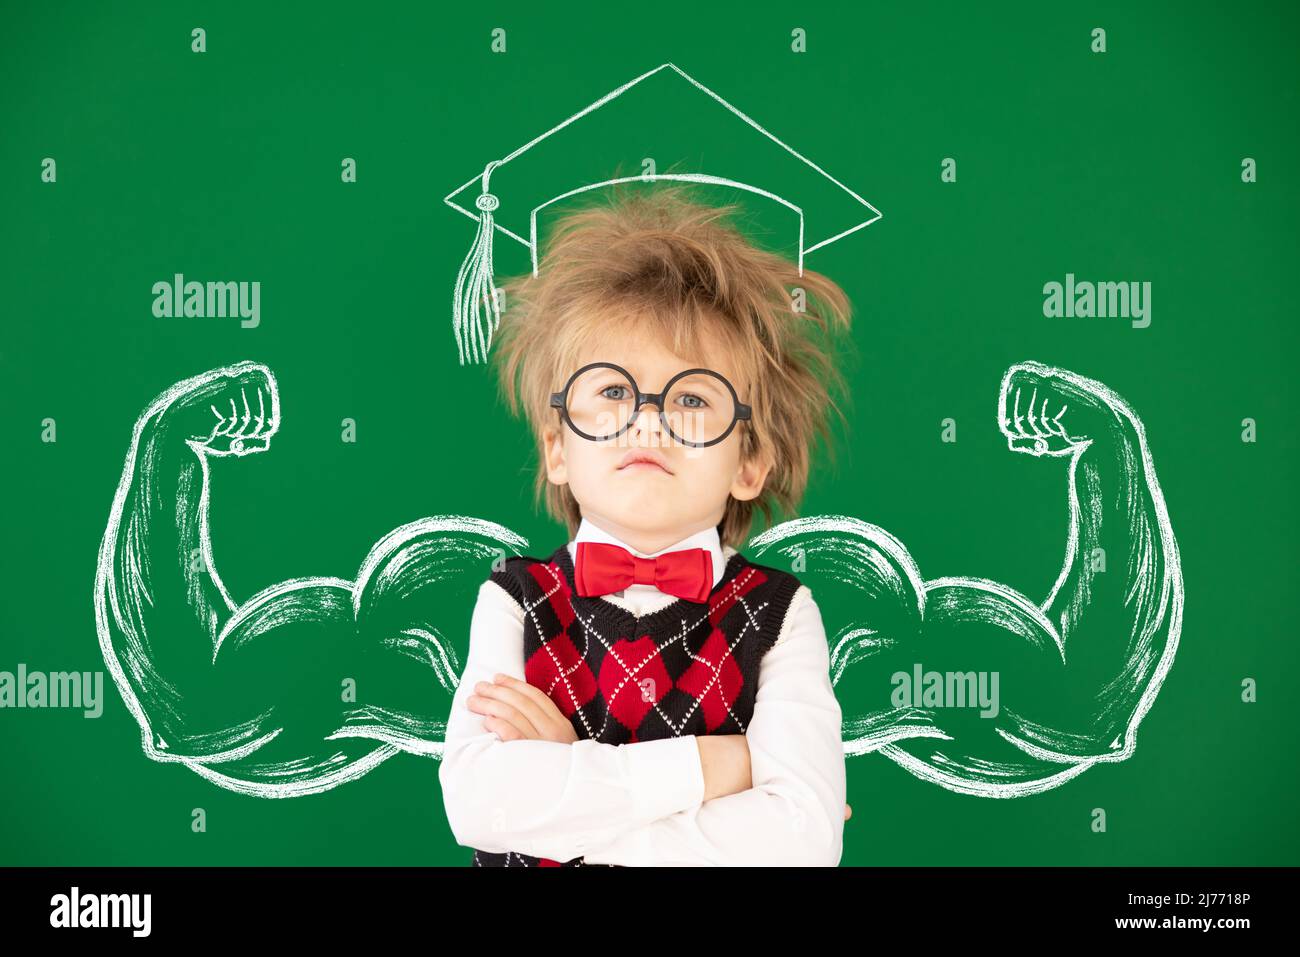 Funny child student in class. Happy kid against green chalkboard. Education concept. Back to school Stock Photo